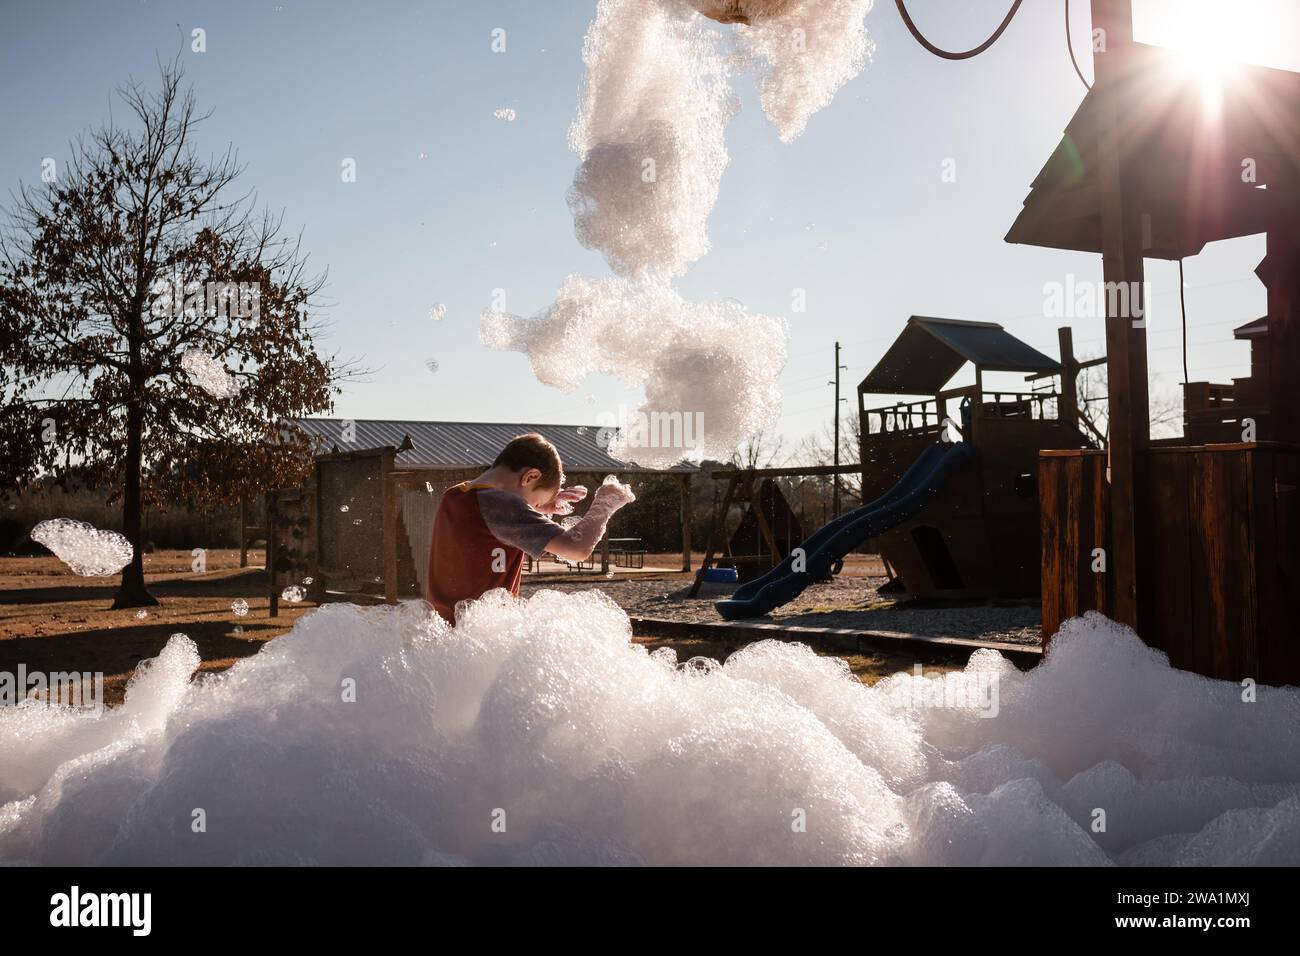 Child playing in foam bubbles at playground Stock Photo